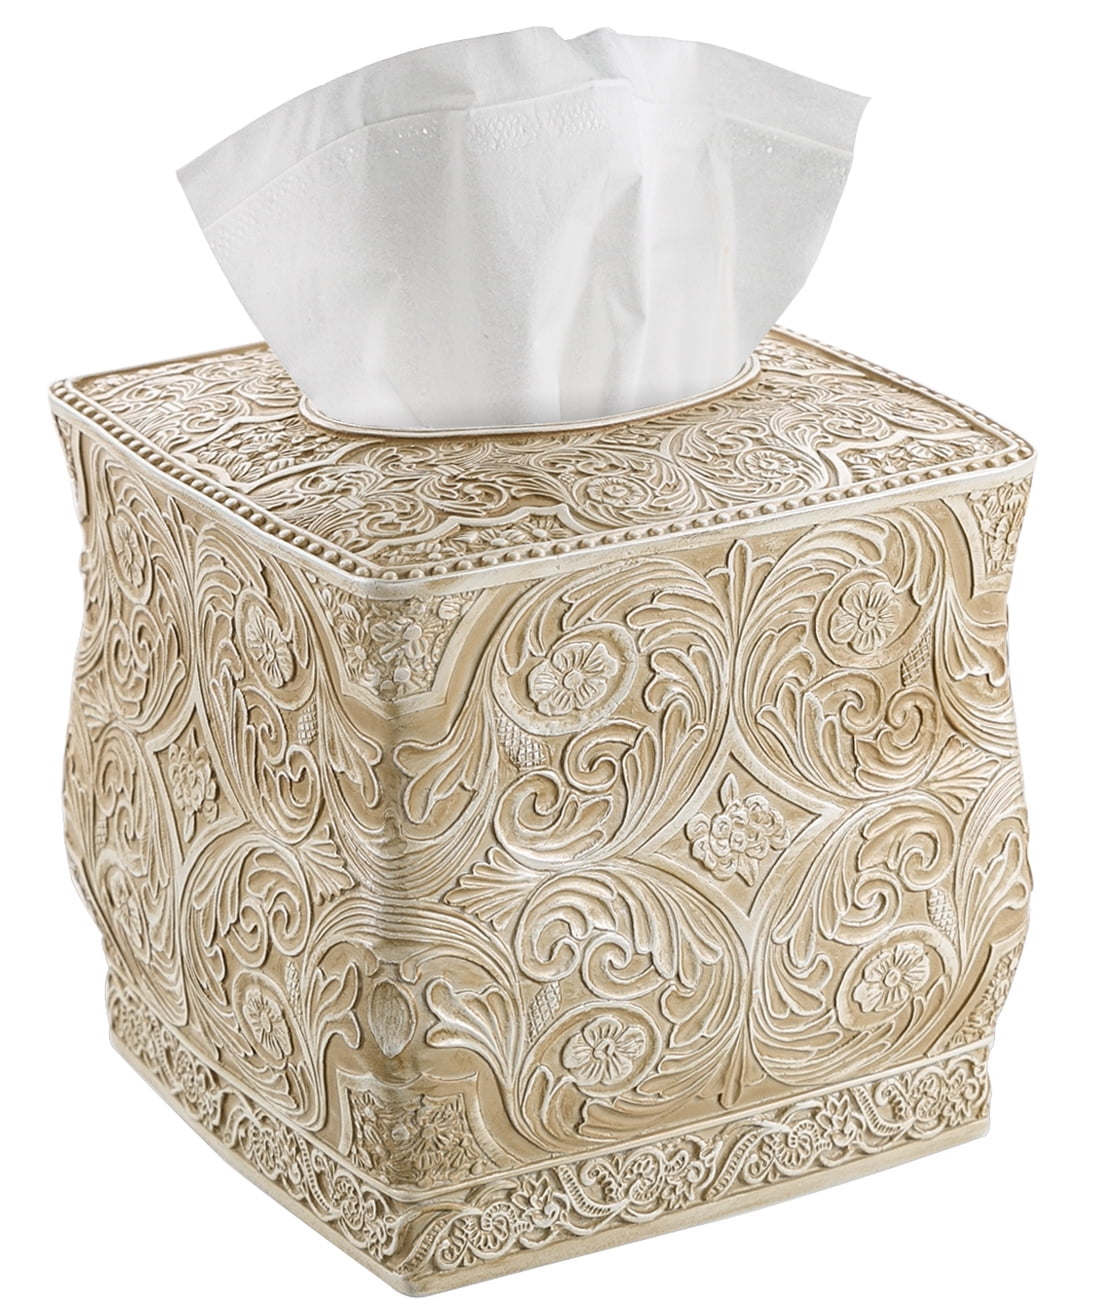 Square Tissue Holder ? Decorative Tissue Box Cover is Finished in Beautiful Victoria Collection